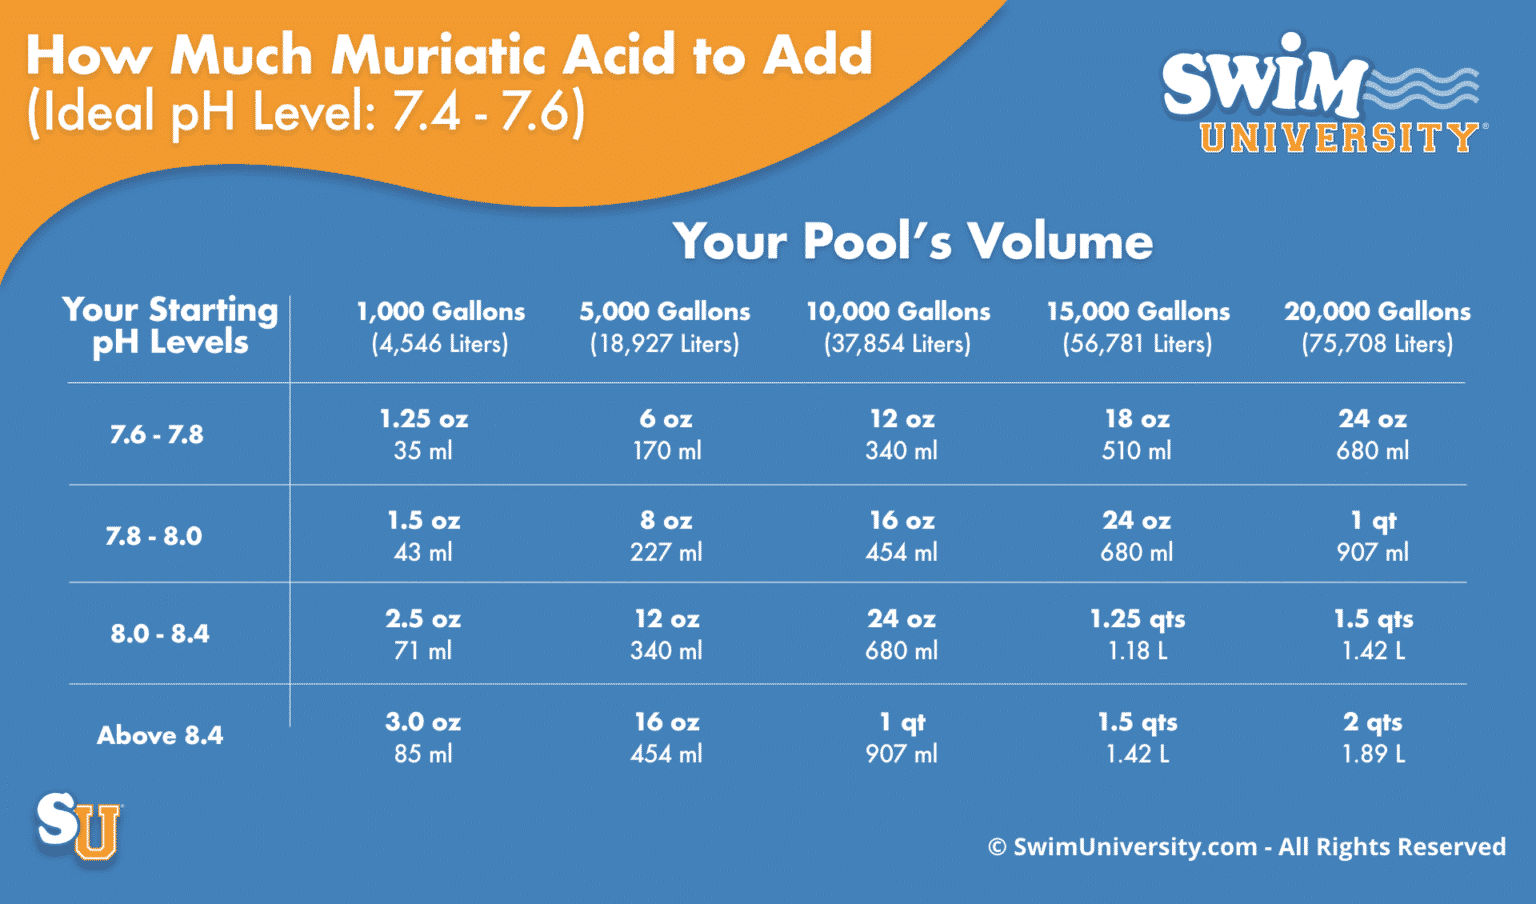 alkalinity-too-high-here-s-how-to-lower-alkalinity-in-a-pool-quickly